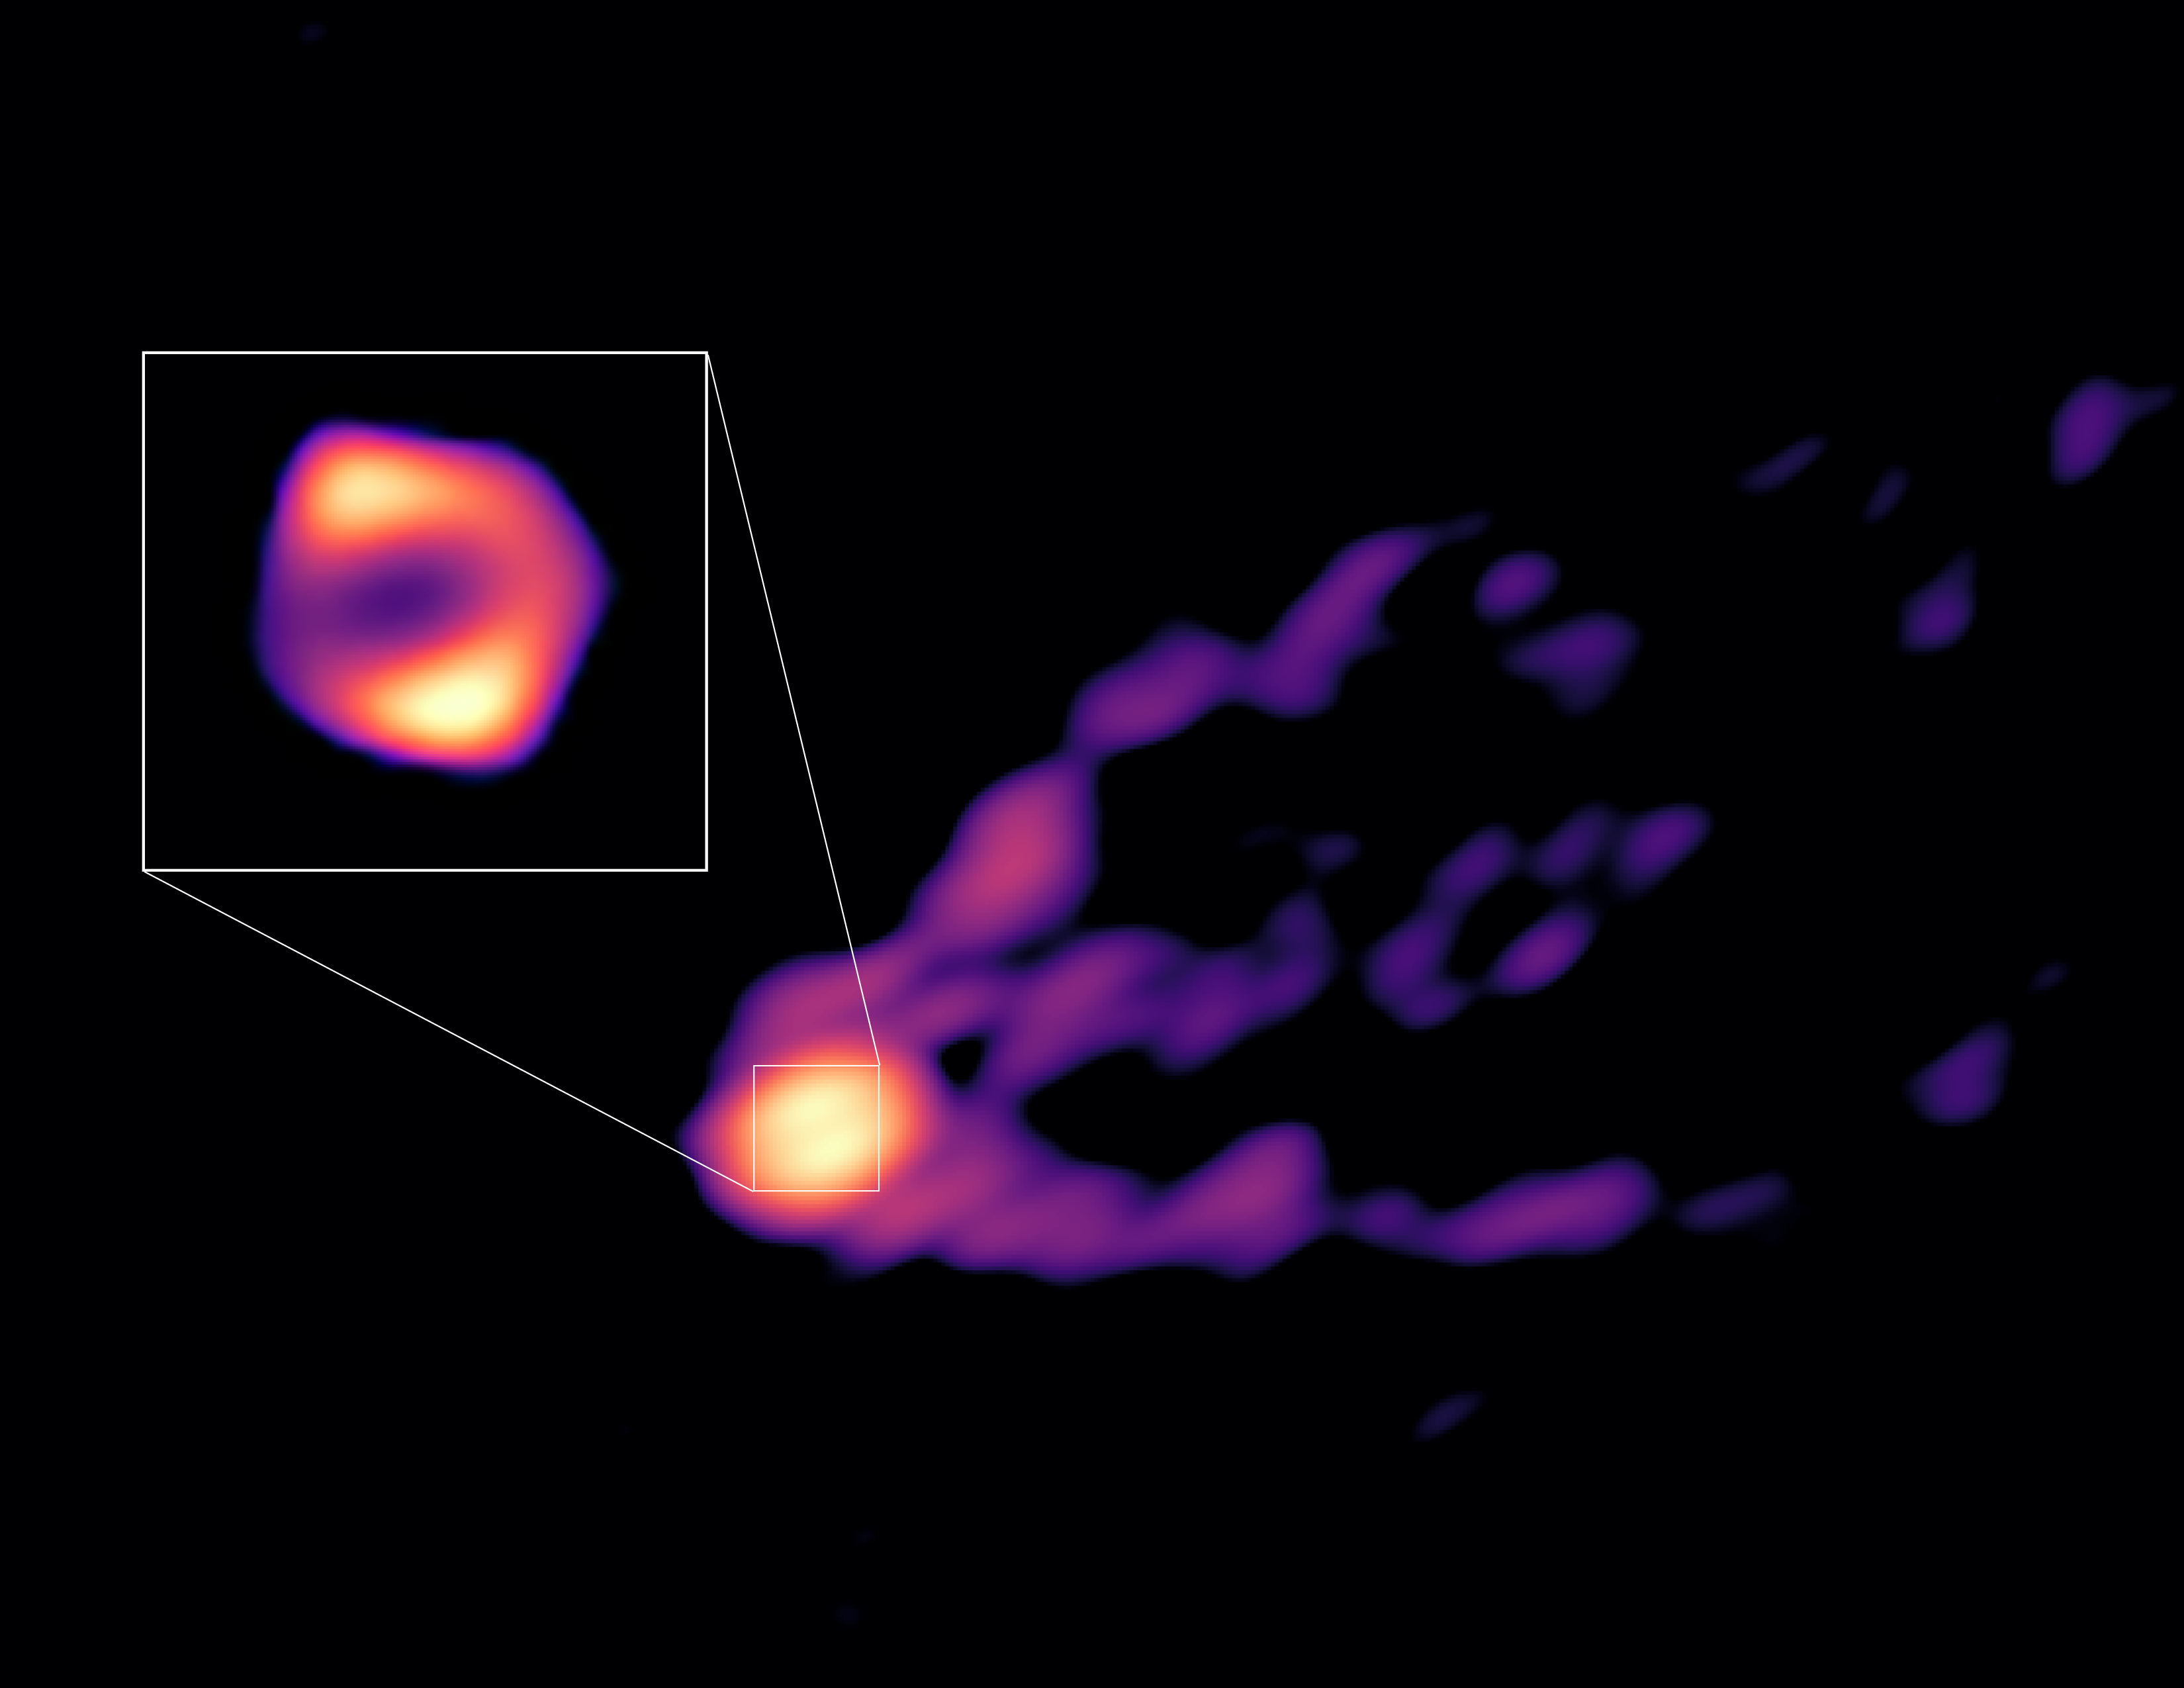 First Image of the M87 Jet with an Accretion Flow and Black Hole by the Joint Observations ALMA and the Greenland Telescope/ Institute of Astronomy and Astrophysics, Academia Sinica